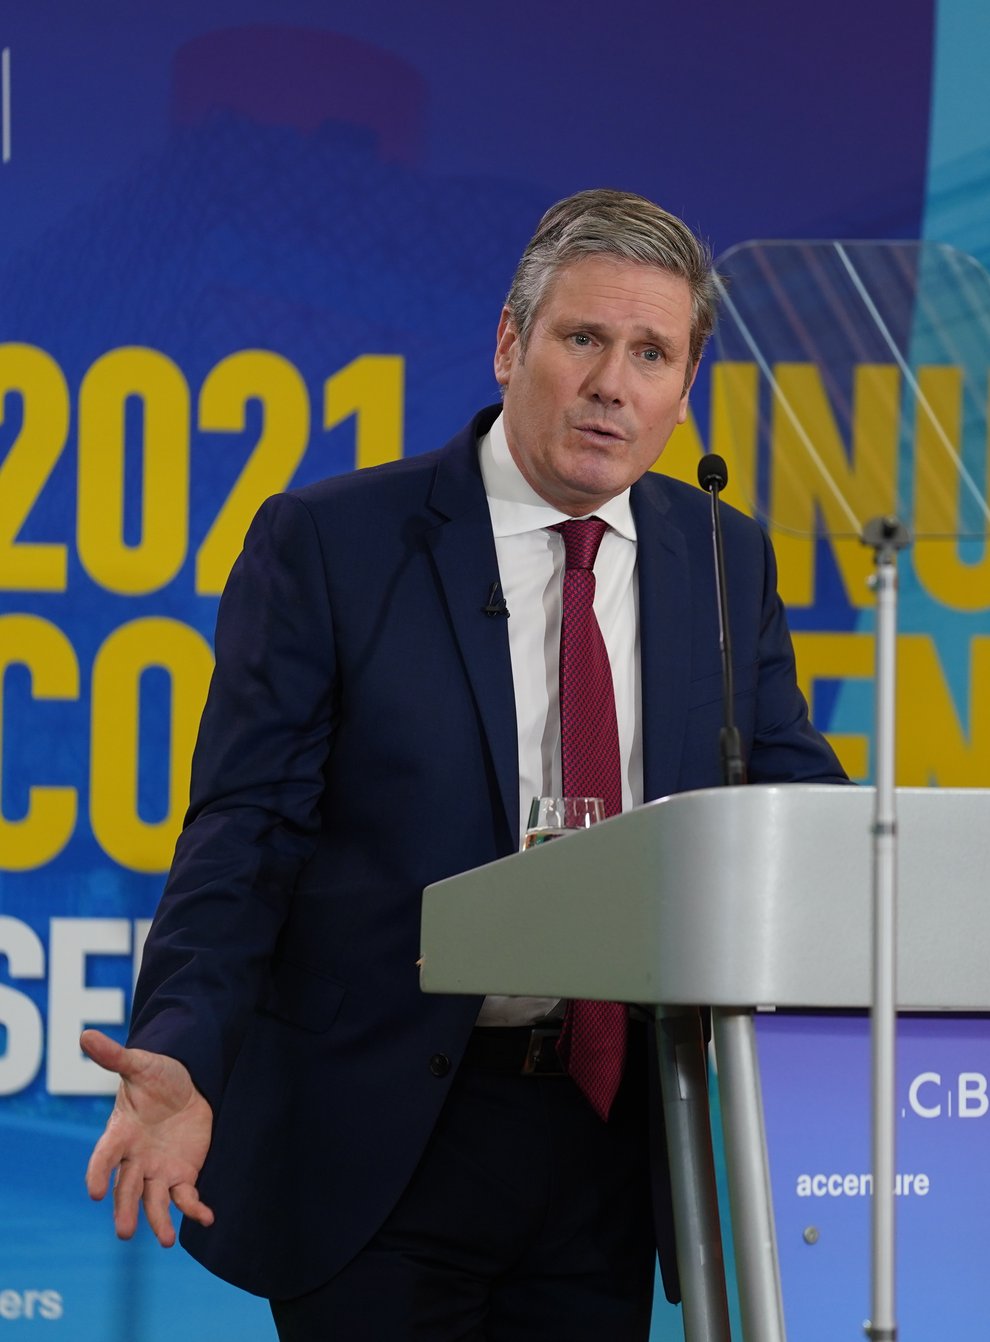 Sir Keir Starmer speaking at the CBI annual conference in Birmingham (Jacob King/PA)